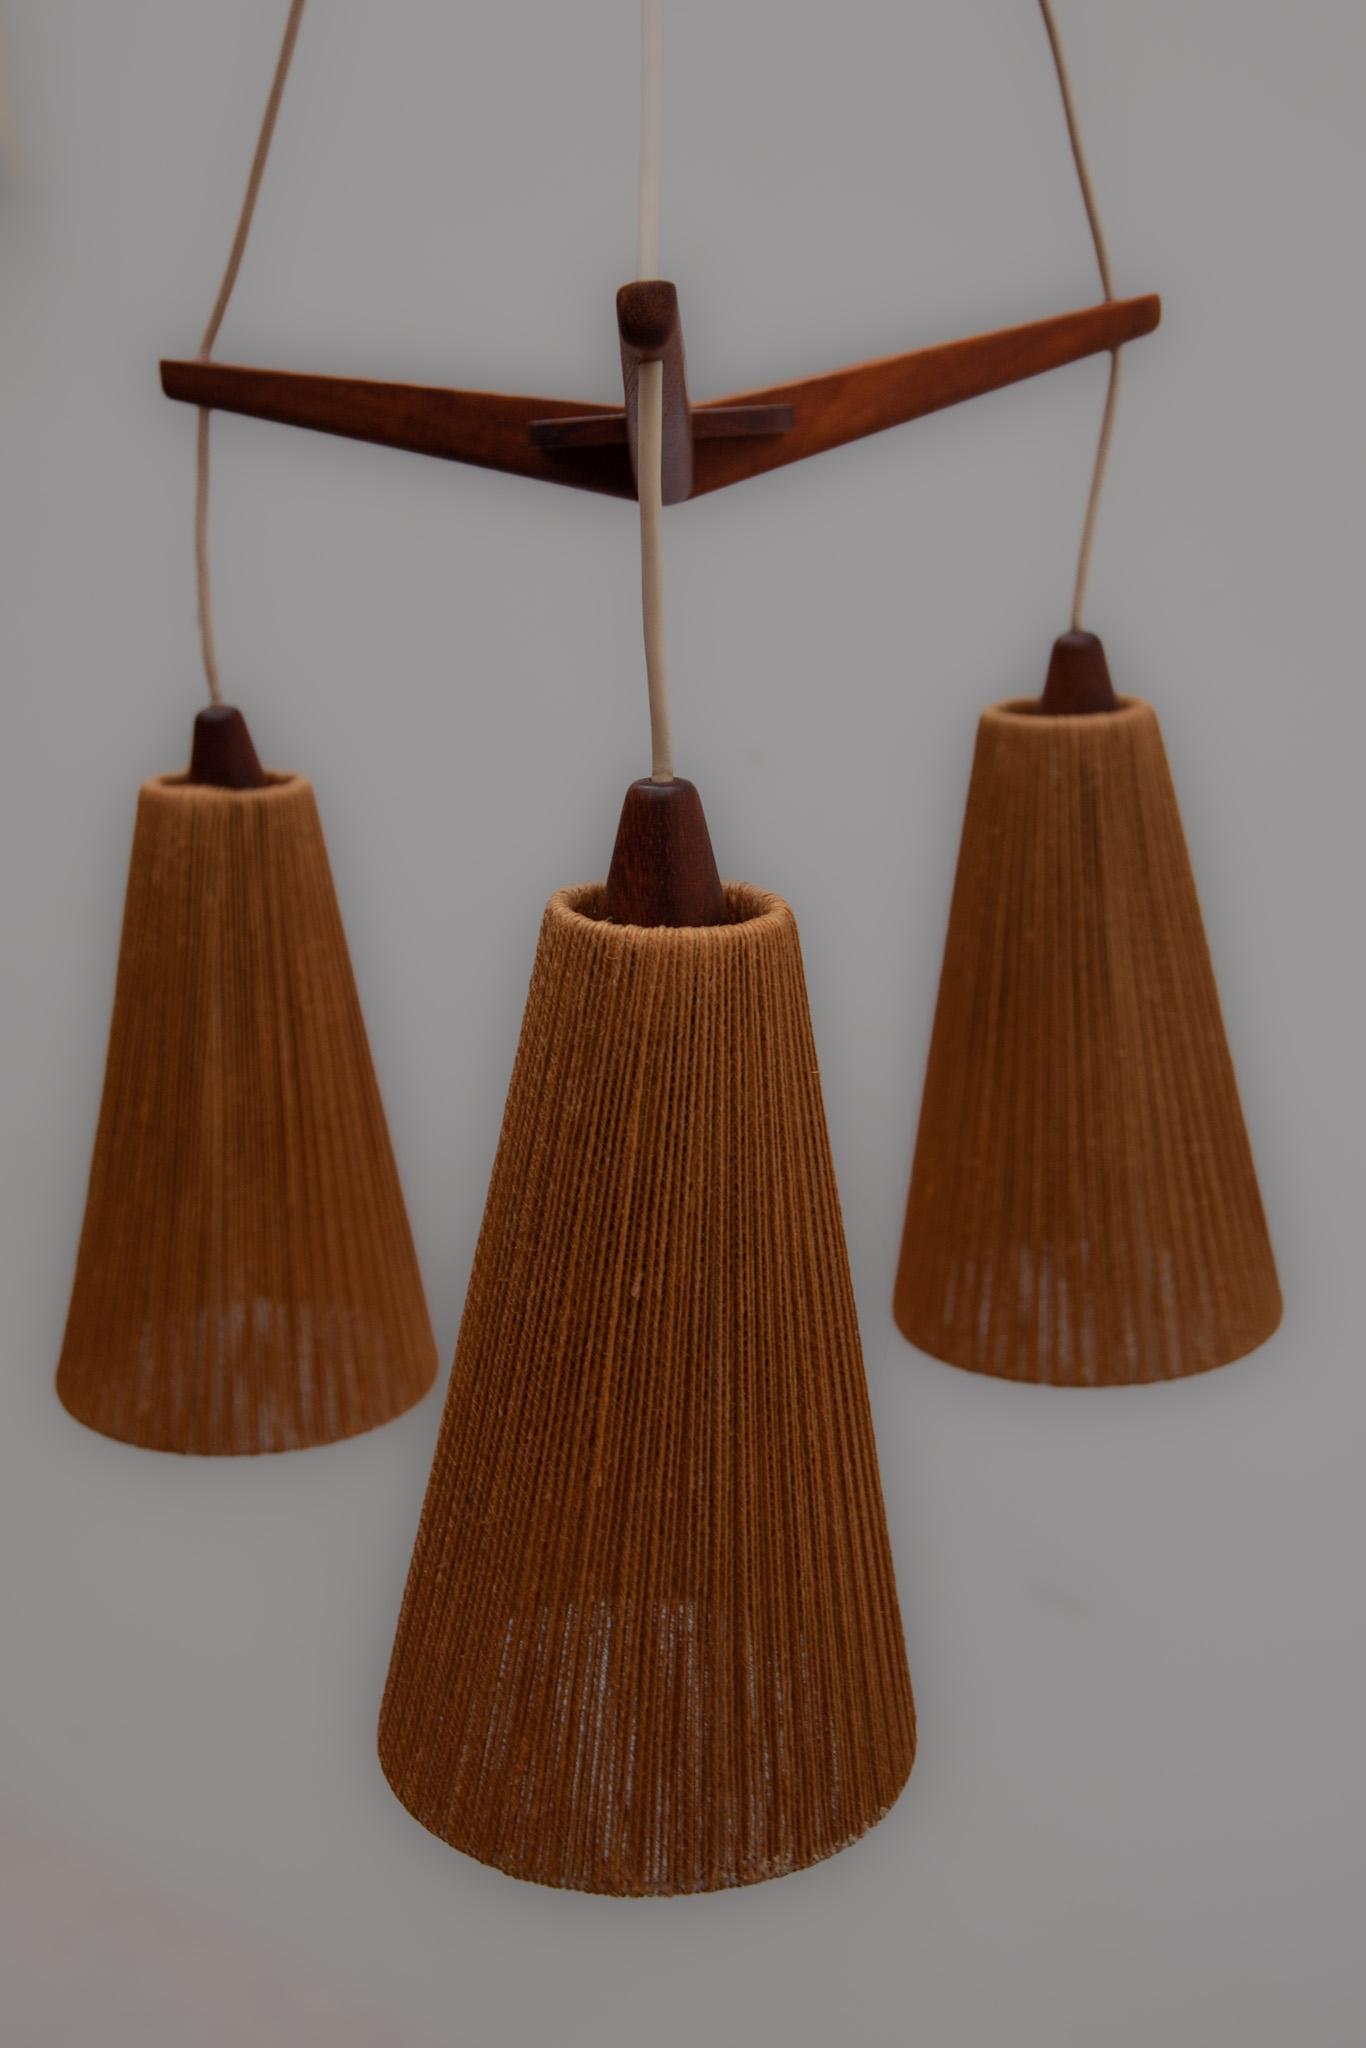 Teak and Jute Cord Pendant Cascade Lamp by Temde, Germany, 1960s For Sale 5